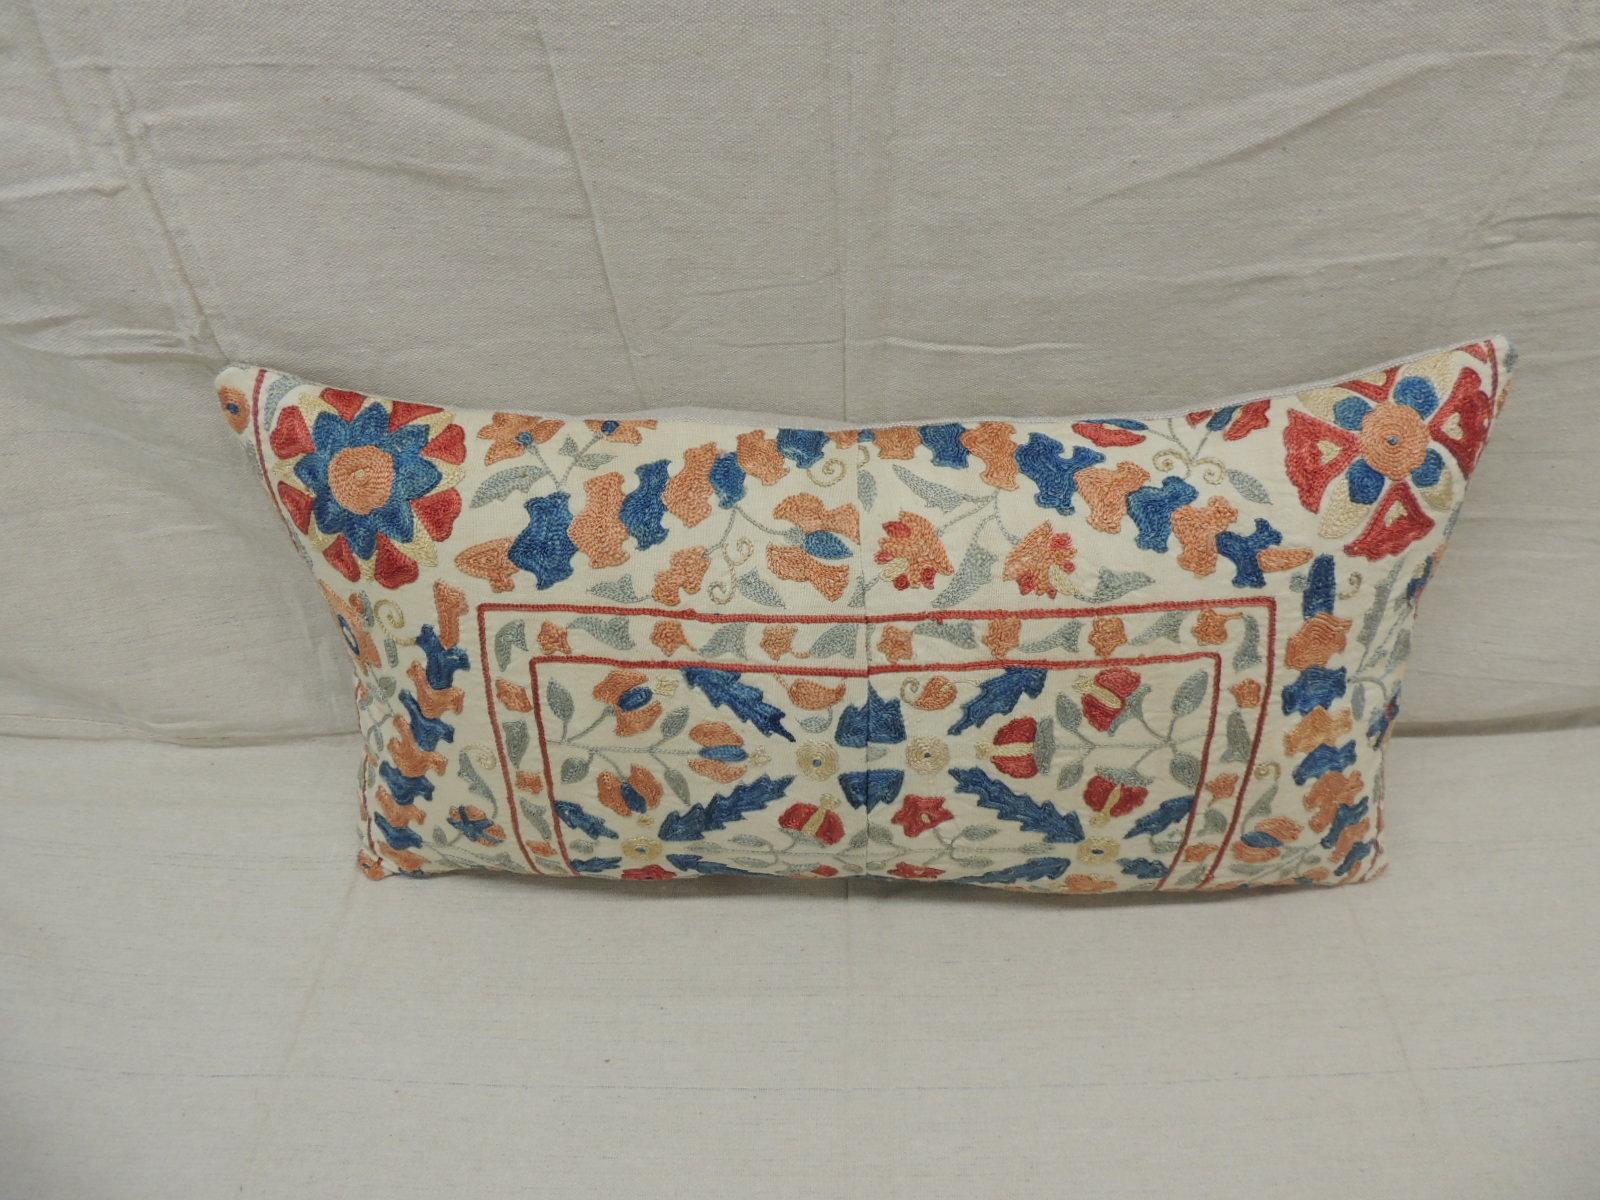 Vintage orange and blue embroidered Suzani decorative bolster pillow.
Natural color antique textured linen backing.
Decorative pillow handcrafted and designed in the USA.
Closure by stitch (no zipper closure) with custom made pillow